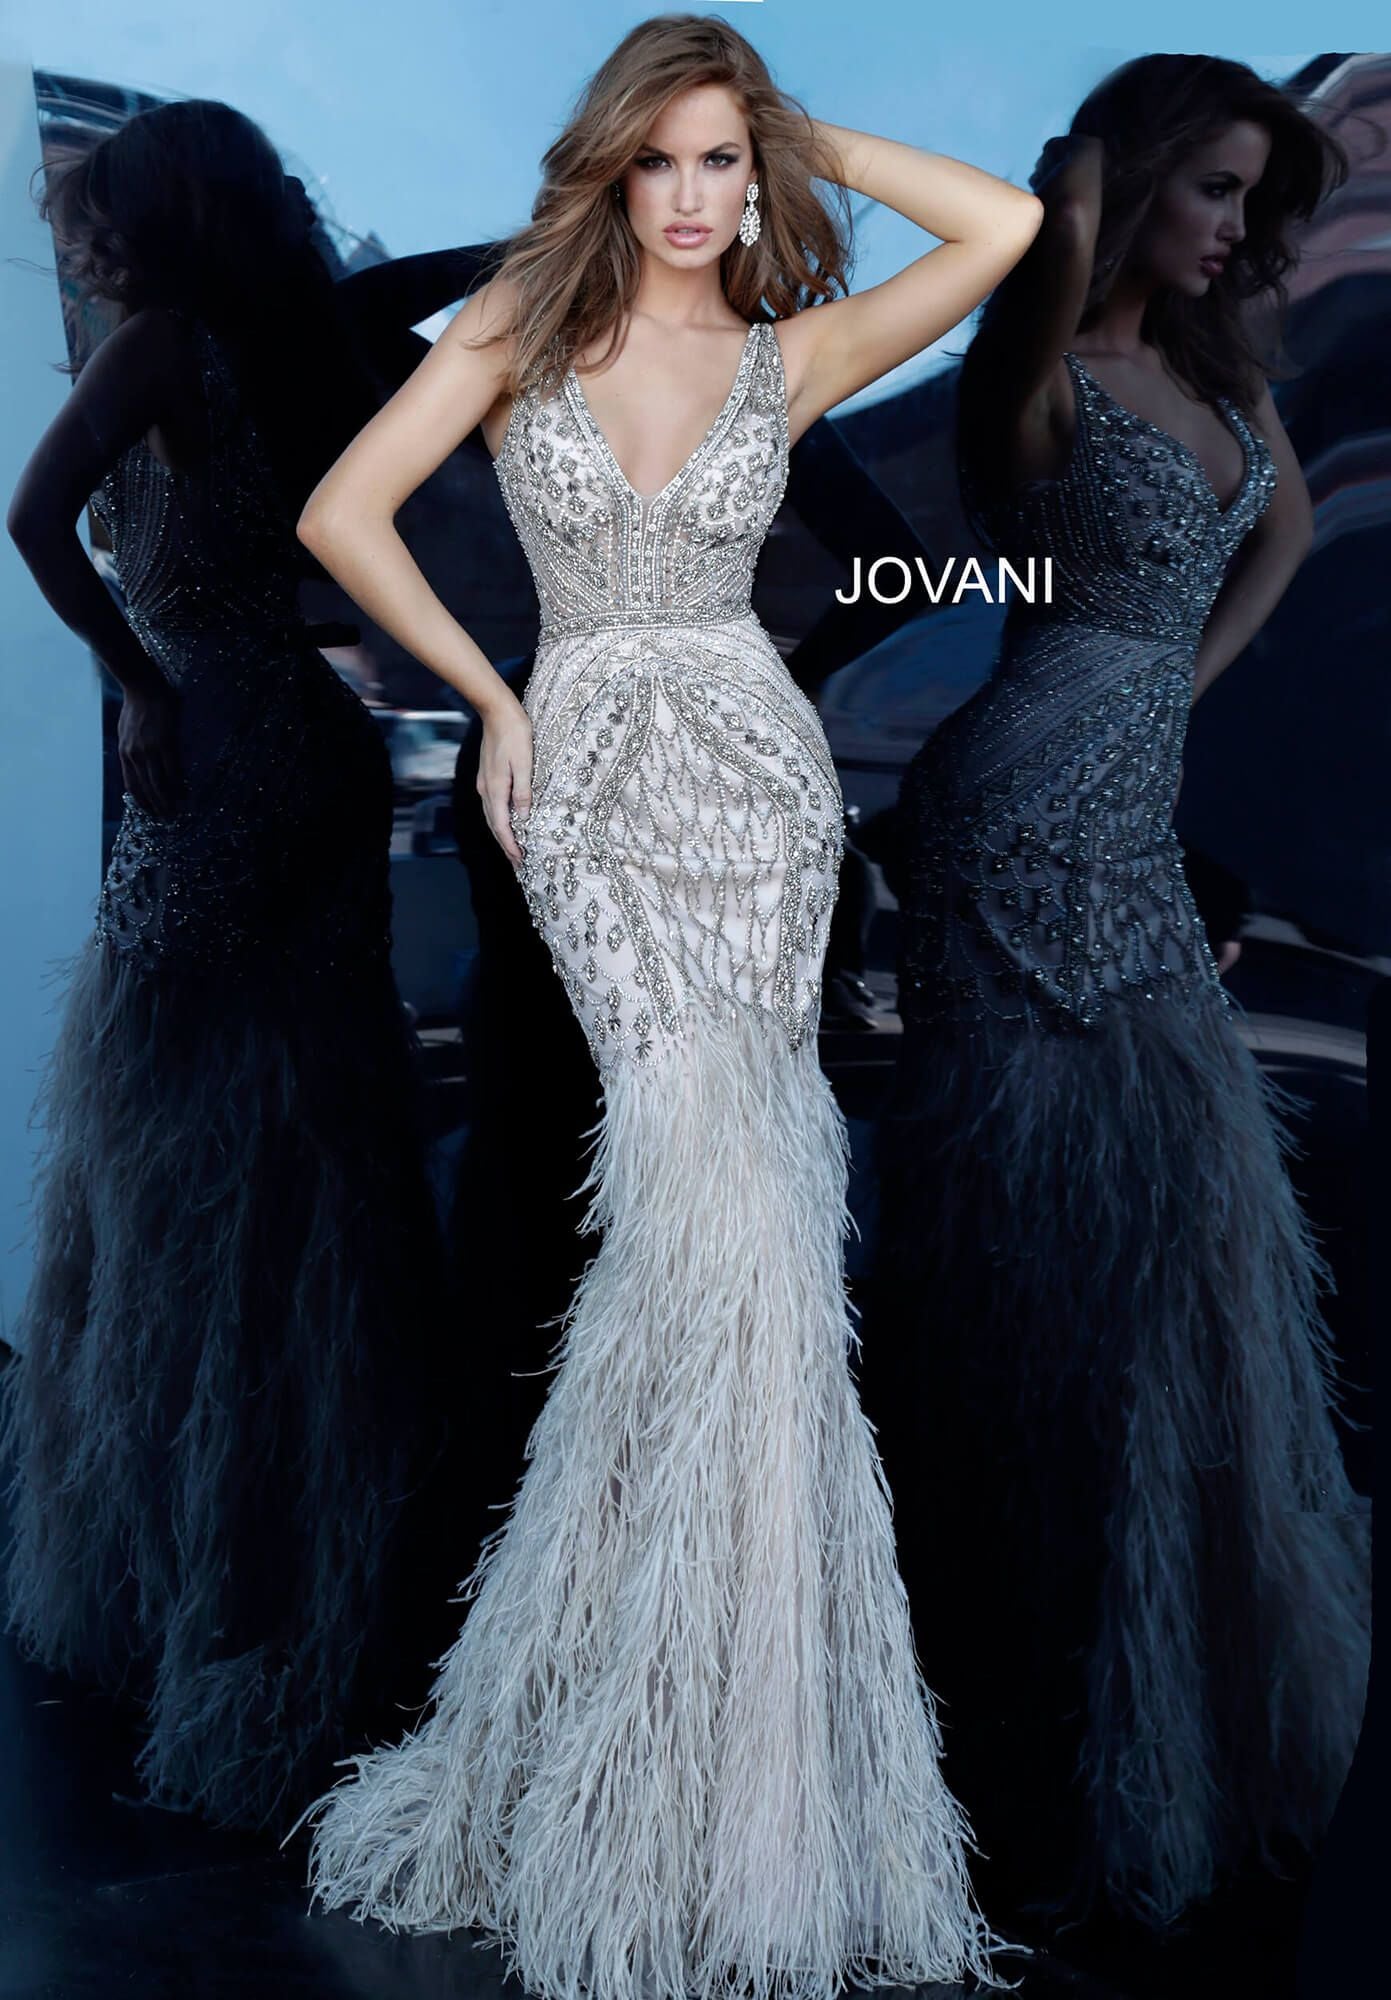 Shop for the Latest Jovani Prom Dresses! - The Dress Outlet